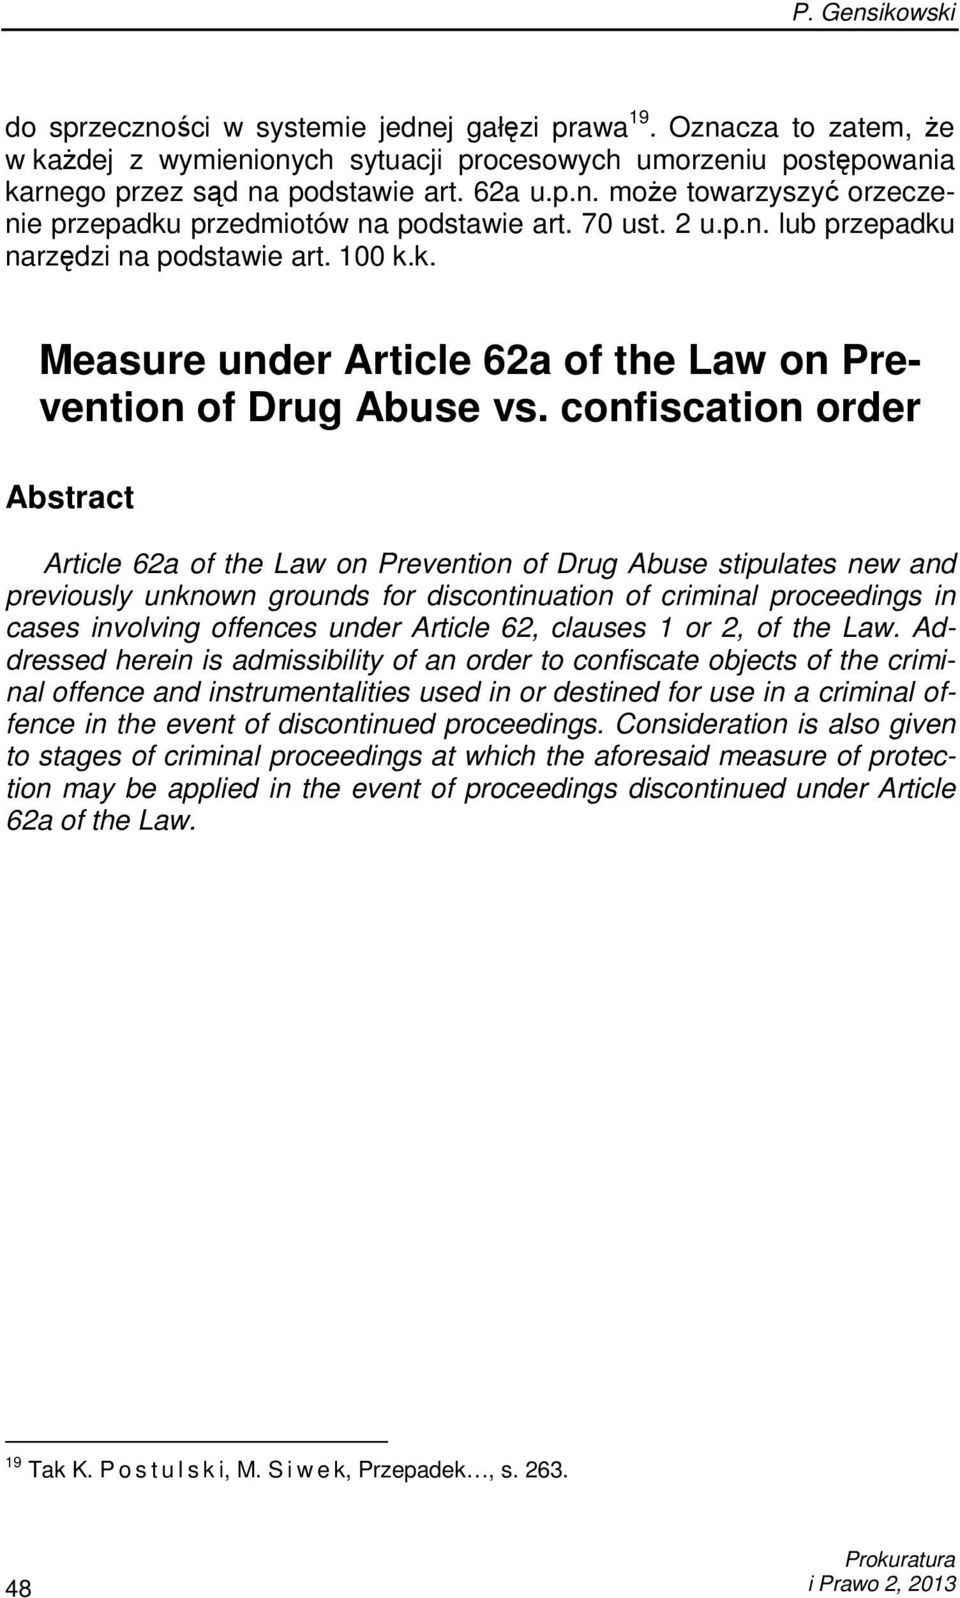 confiscation order Abstract Article 62a of the Law on Prevention of Drug Abuse stipulates new and previously unknown grounds for discontinuation of criminal proceedings in cases involving offences